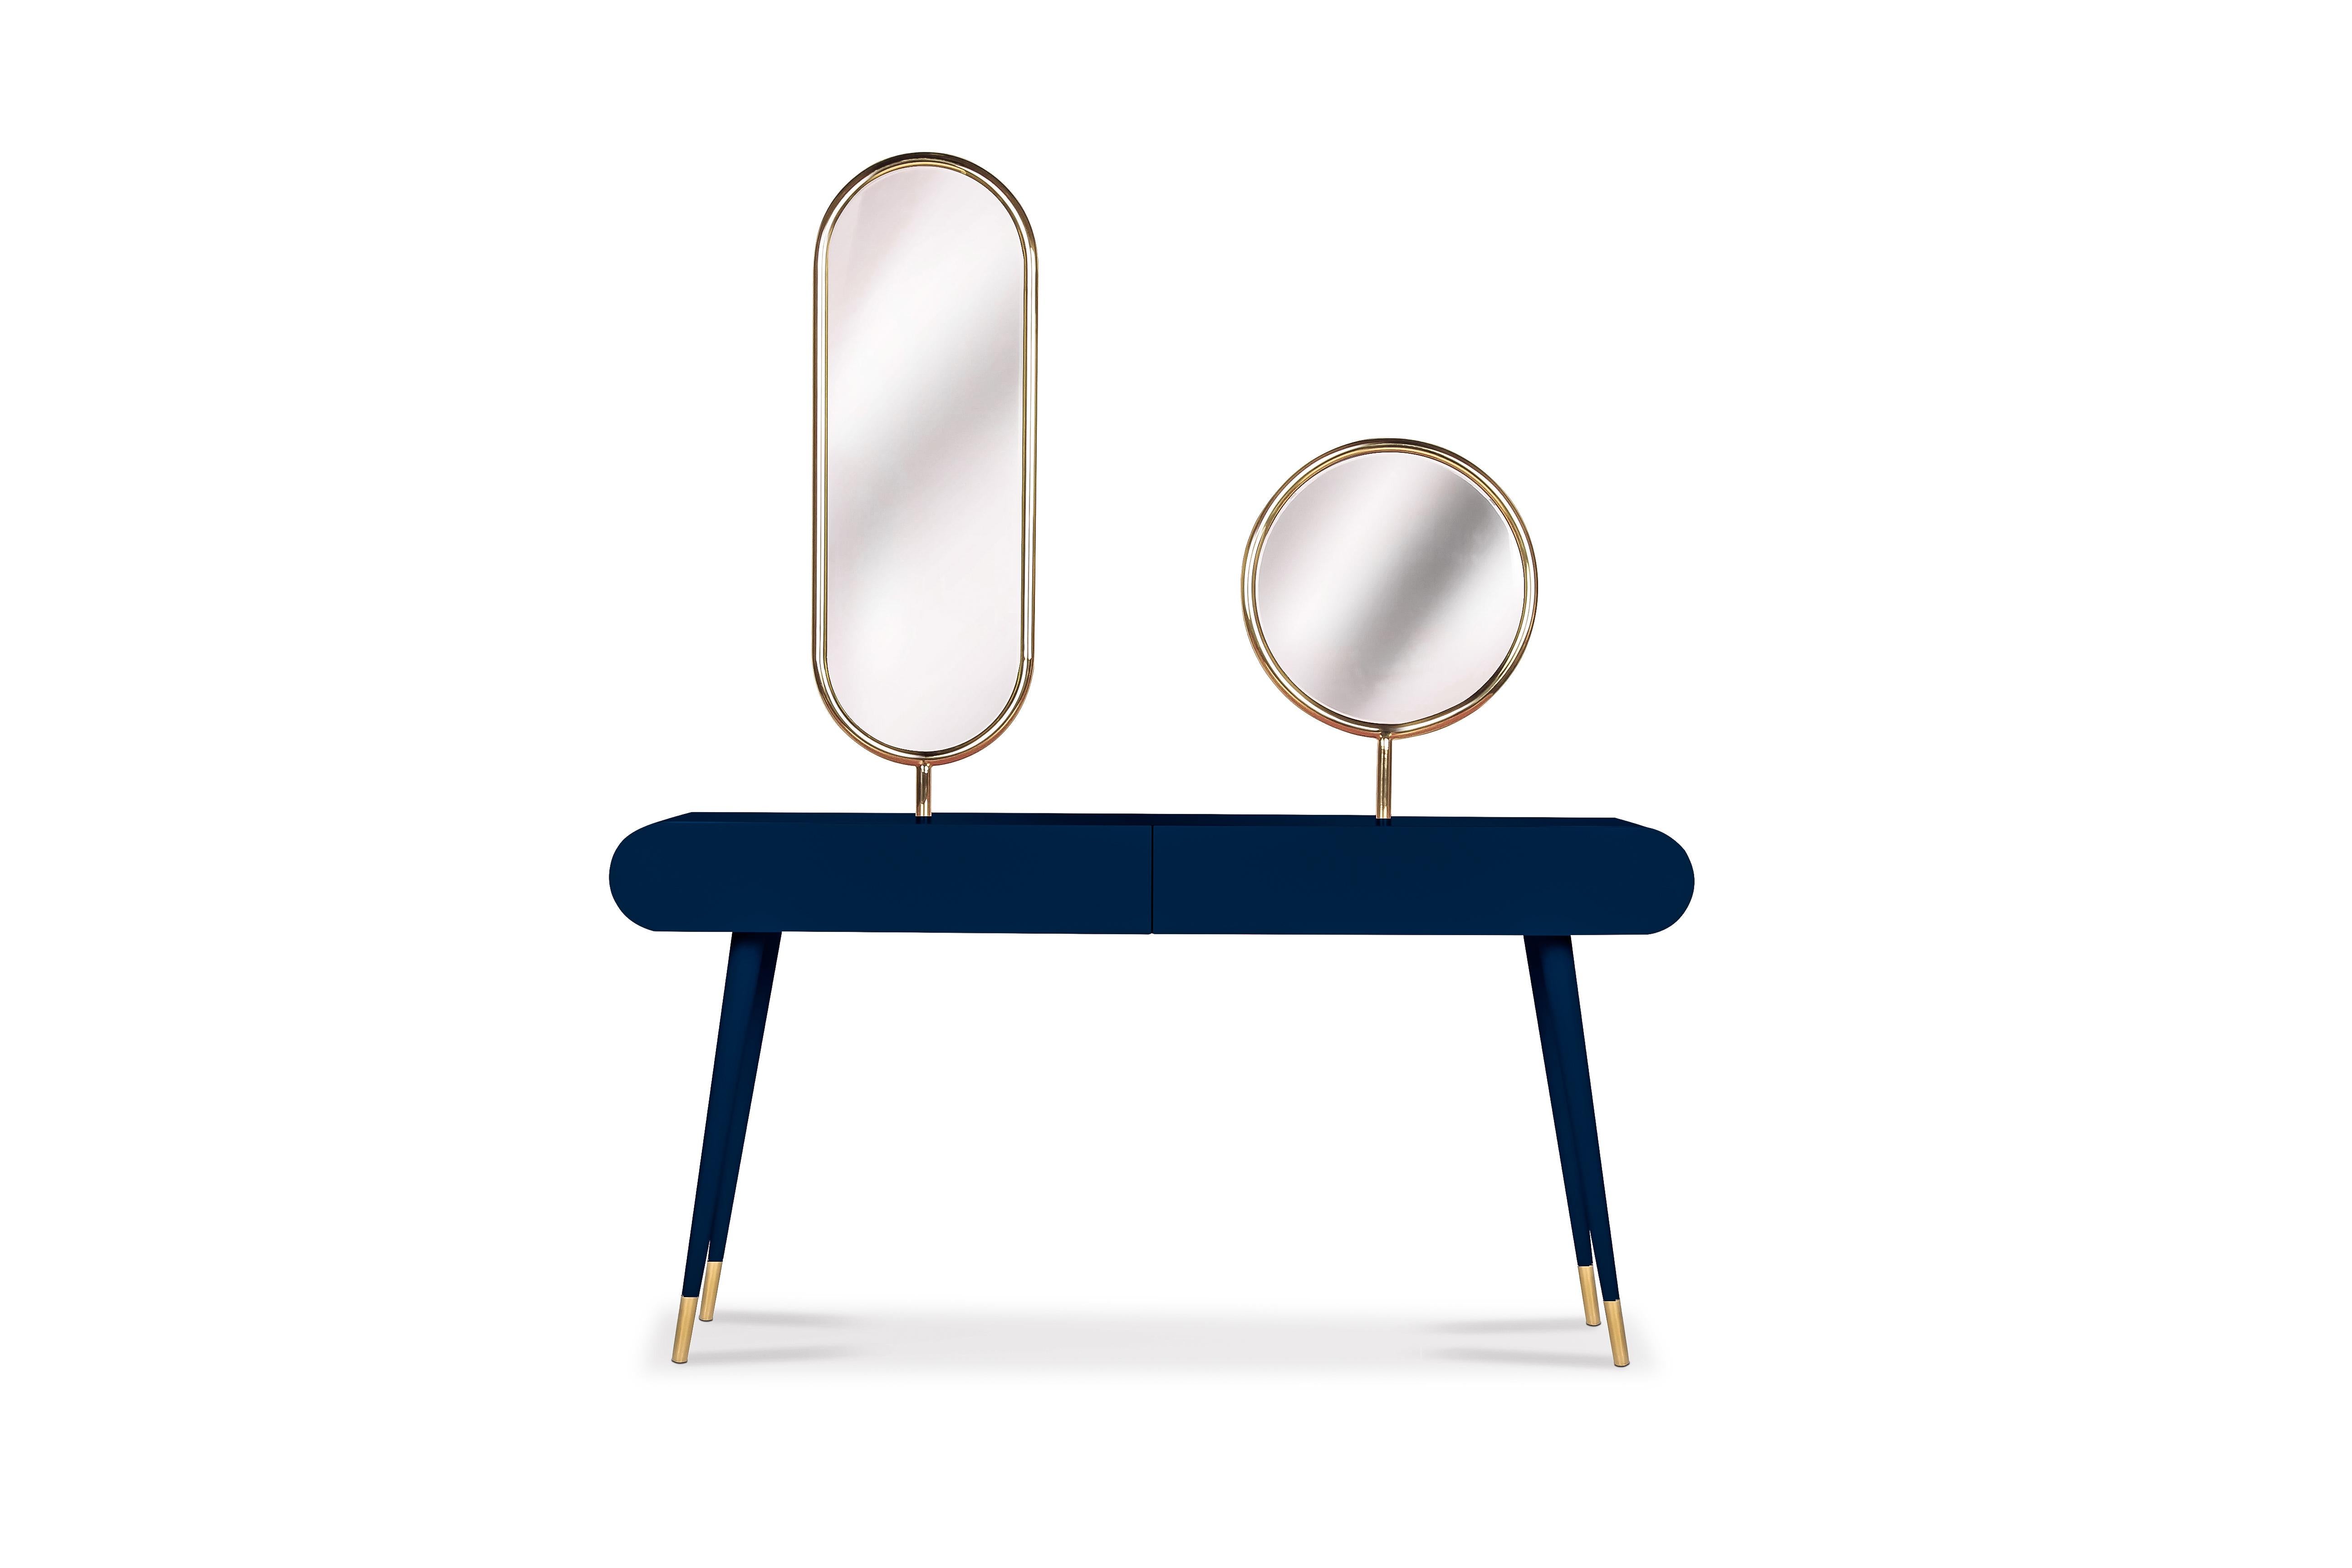 Pearl Grace dressing table, Royal Stranger
Dimensions: 182 x 160 x 45 cm
Materials: Lacquered wood, brass
Available in different colors: Pink and Royal red, mint and Royal green, light blue and Royal, blue
Royal Stranger is an exclusive